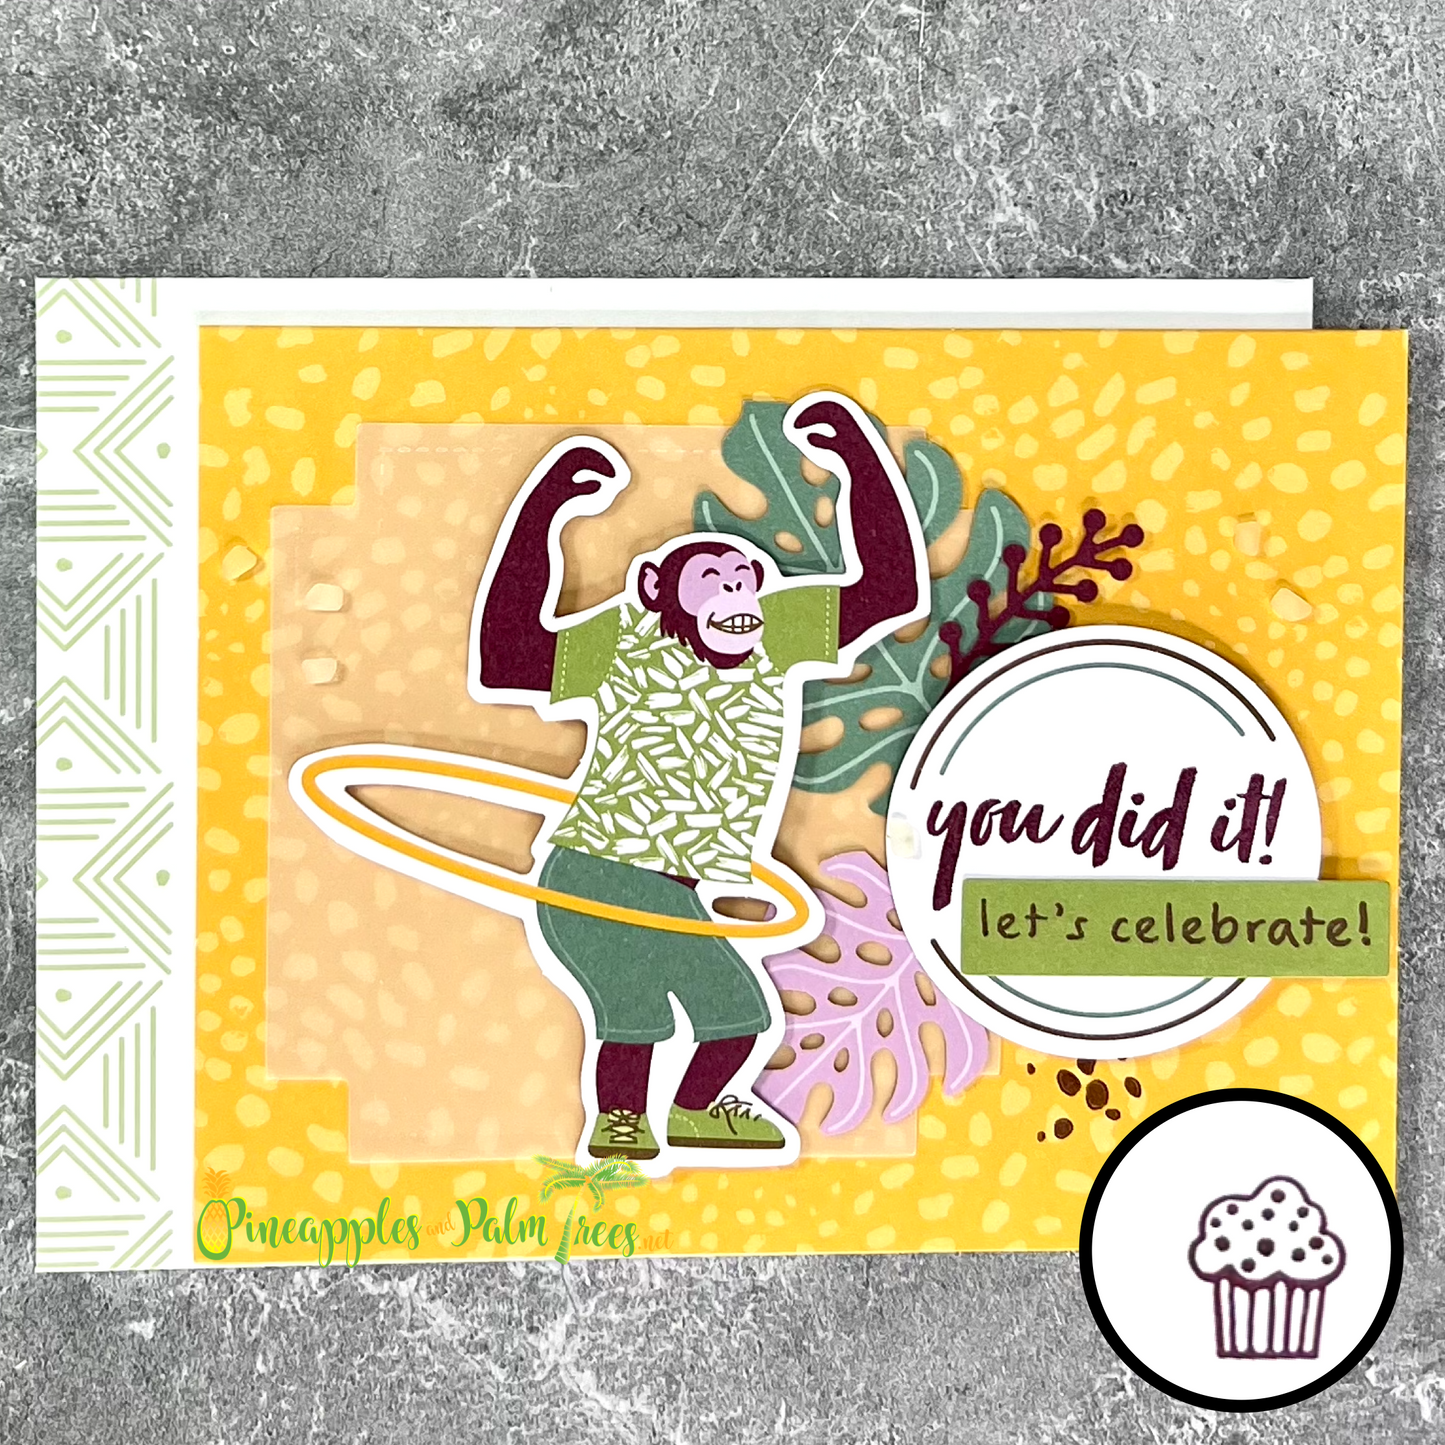 Greeting Card: You Did It! Let's Celebrate! - monkey in a hula hoop